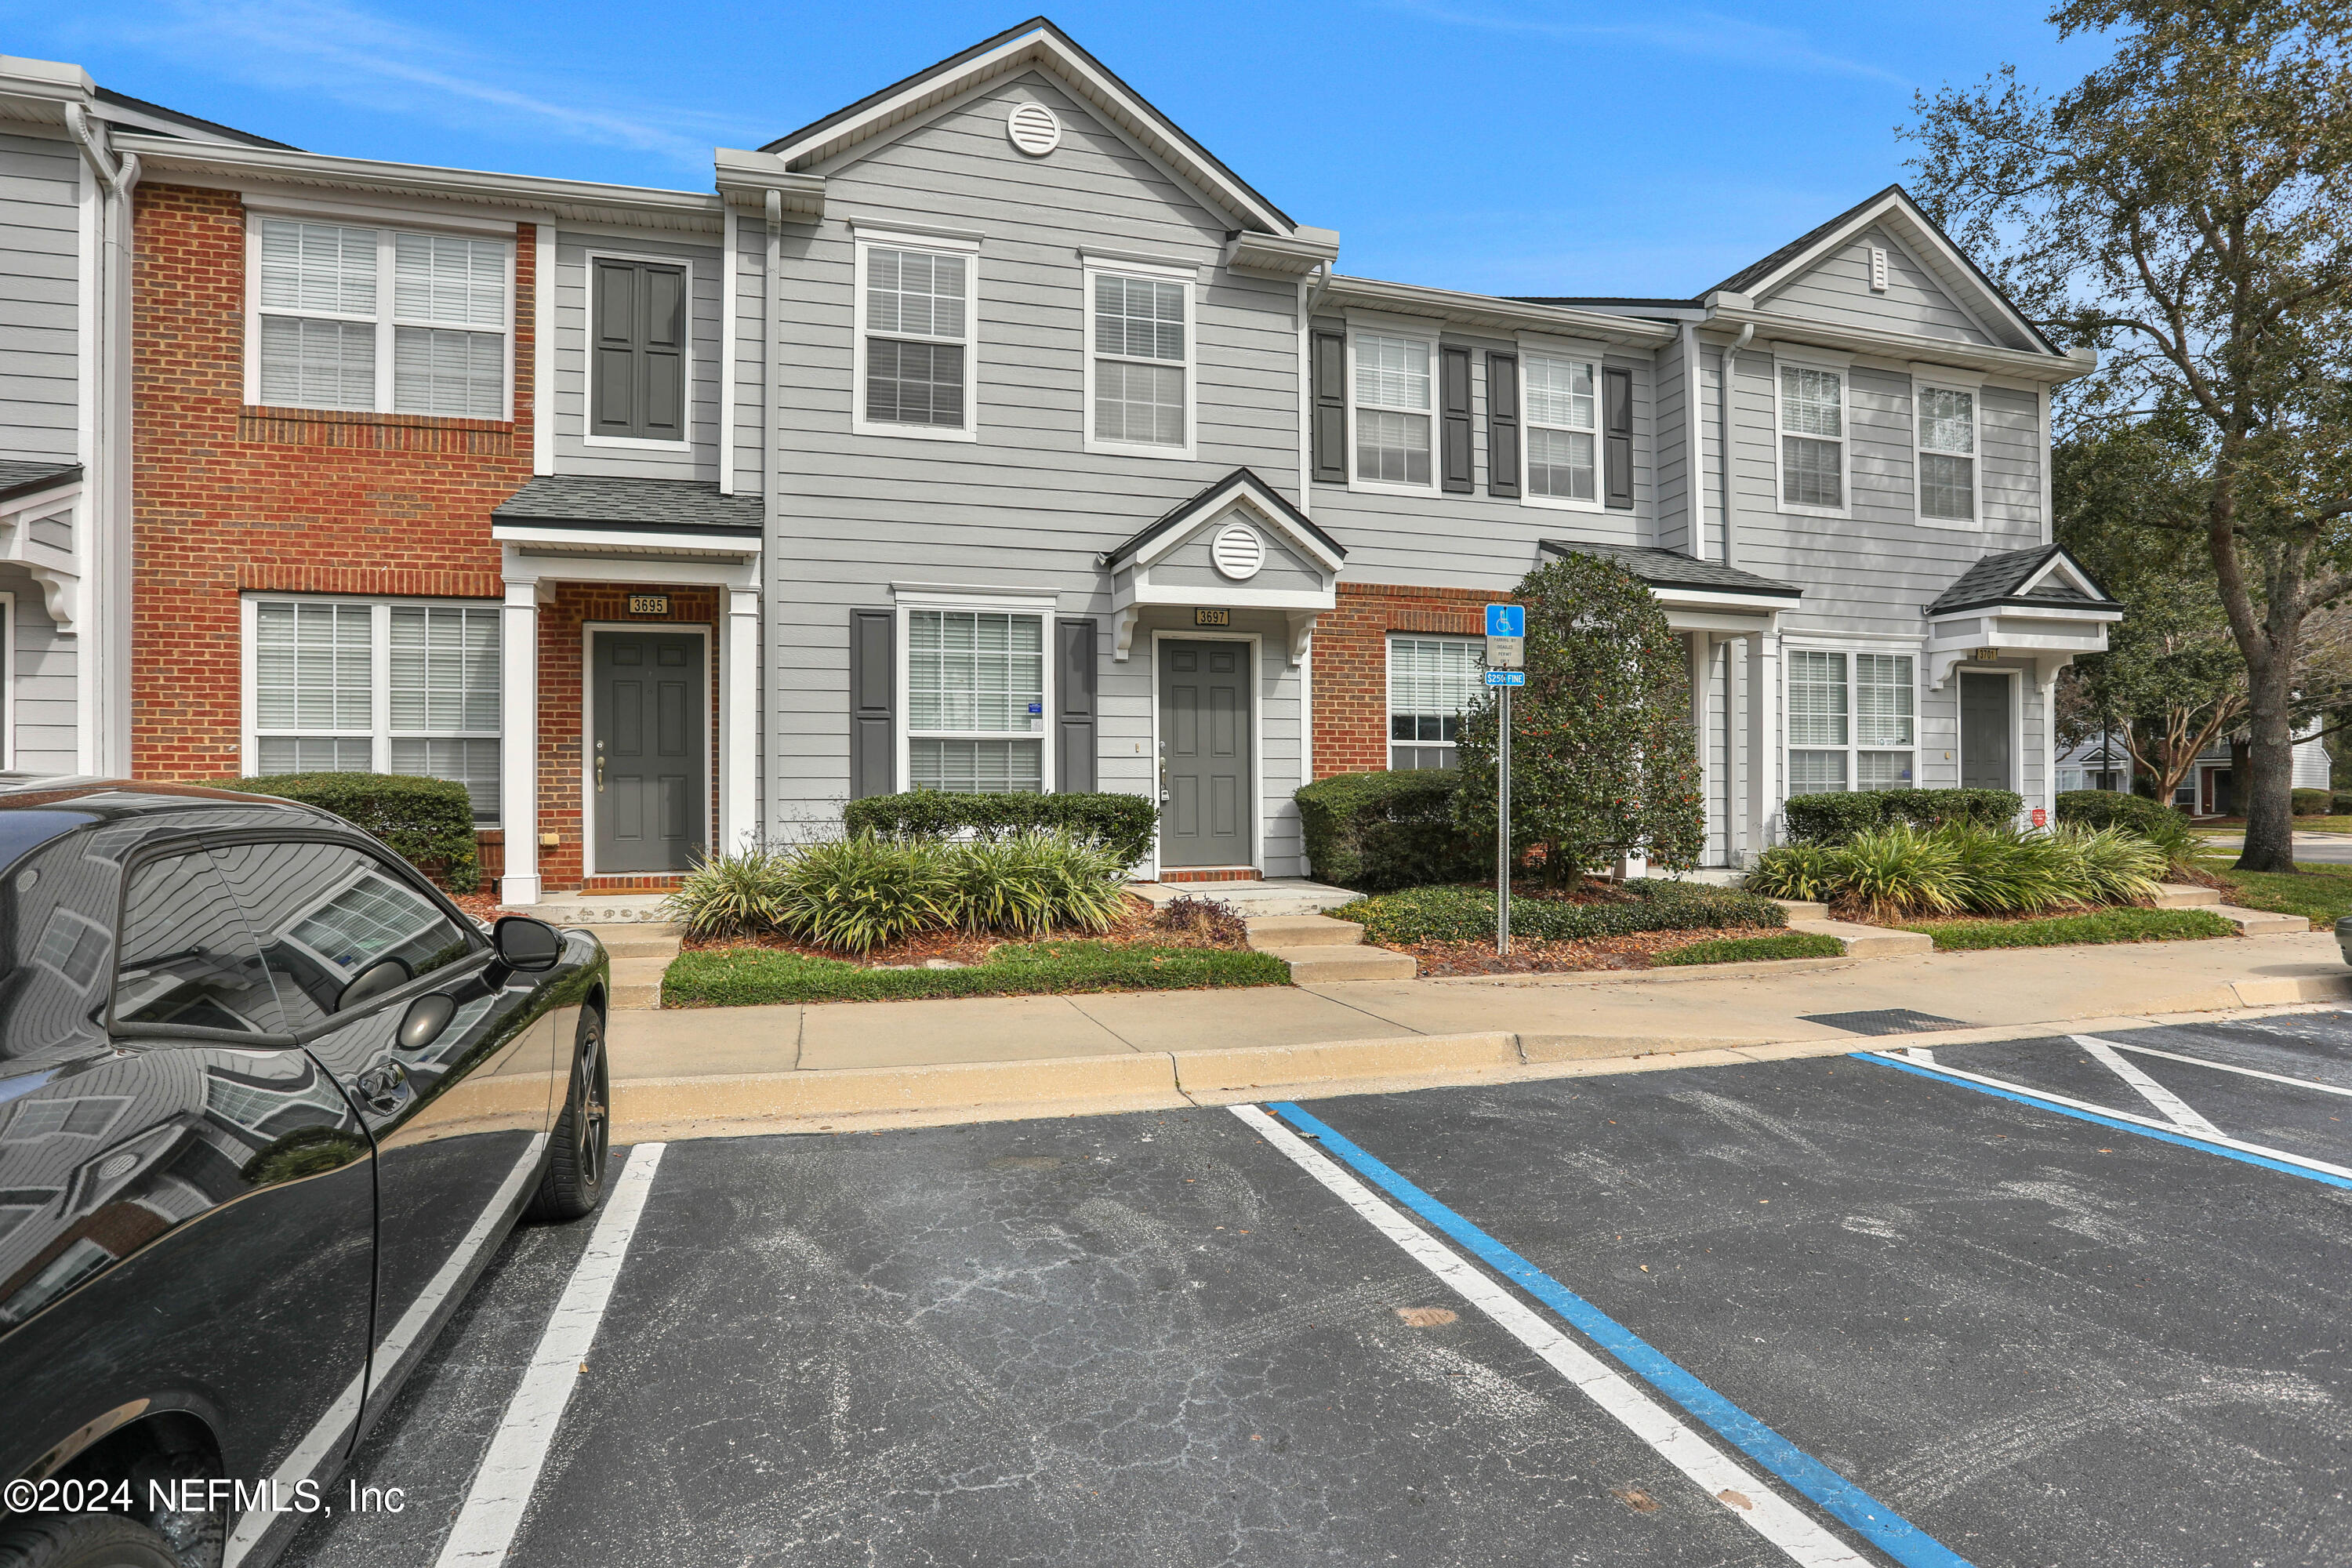 View Jacksonville, FL 32224 townhome